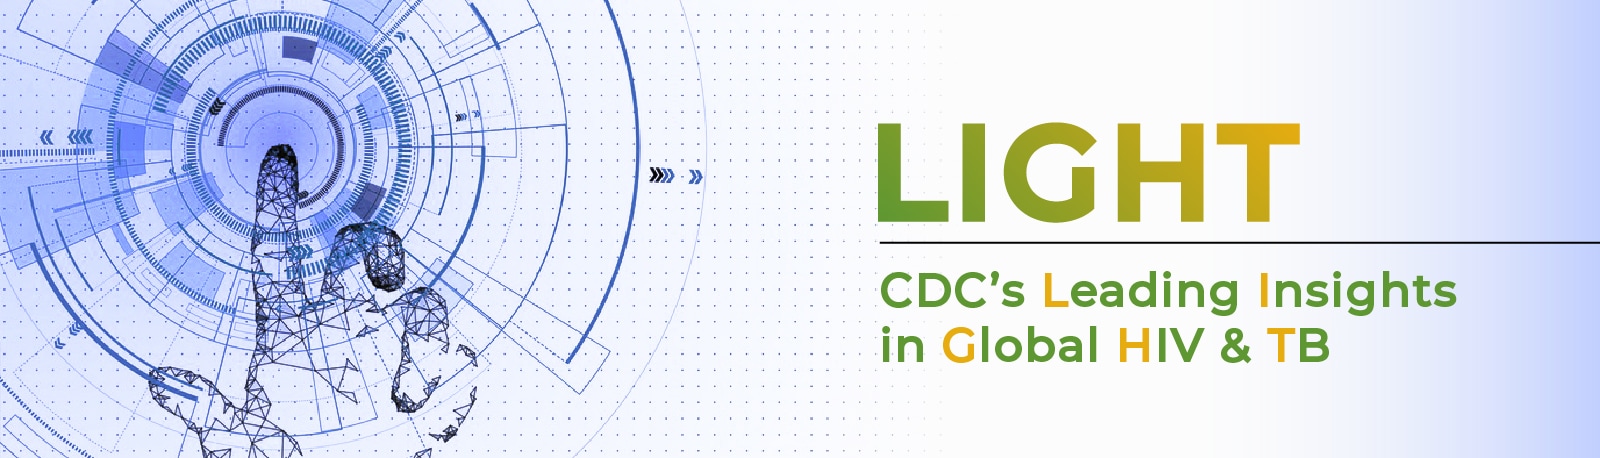 Project light – CDC’s leading insights in Global HIV and TB - official banner